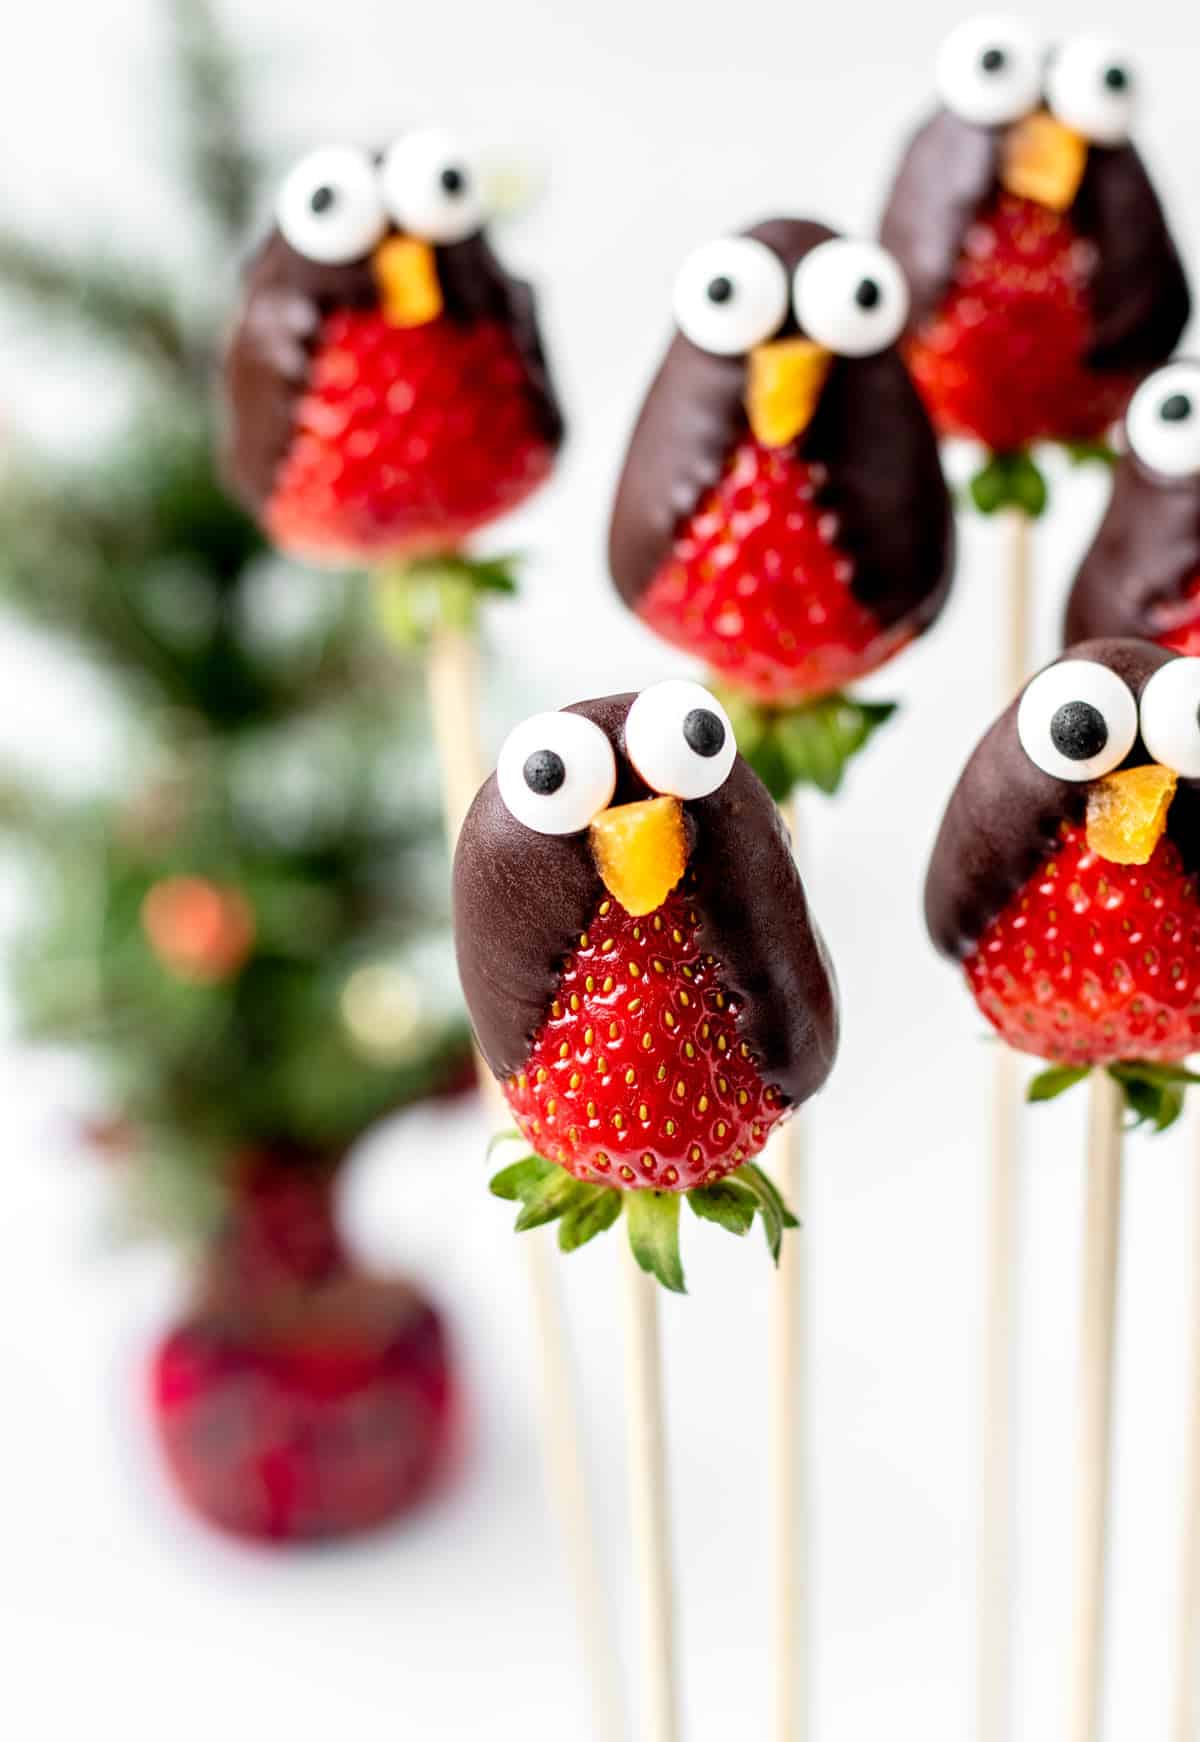 A close-up of the strawberry penguins with candy eyeballs and an apricot beak.